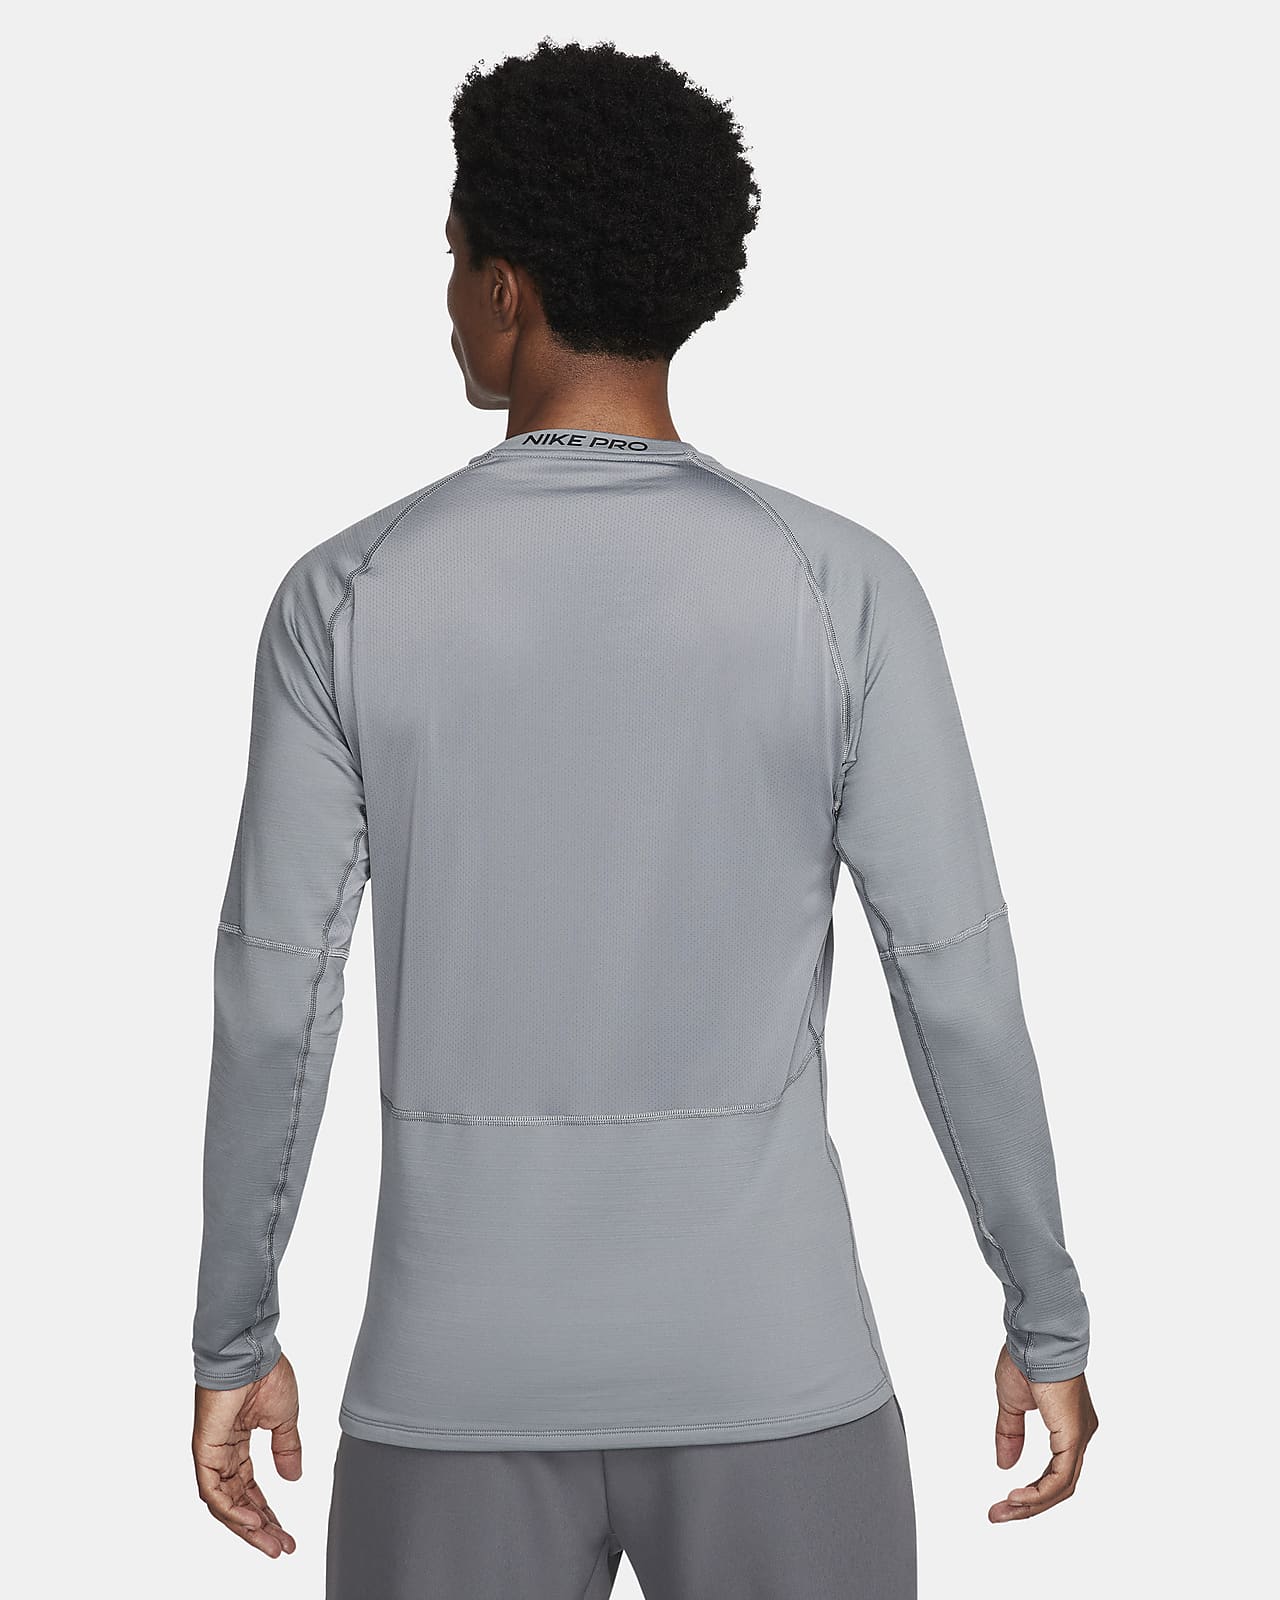 NIKE PRO COMBAT LONG SLEEVE COMPRESSION TRAINING TOP S SMALL